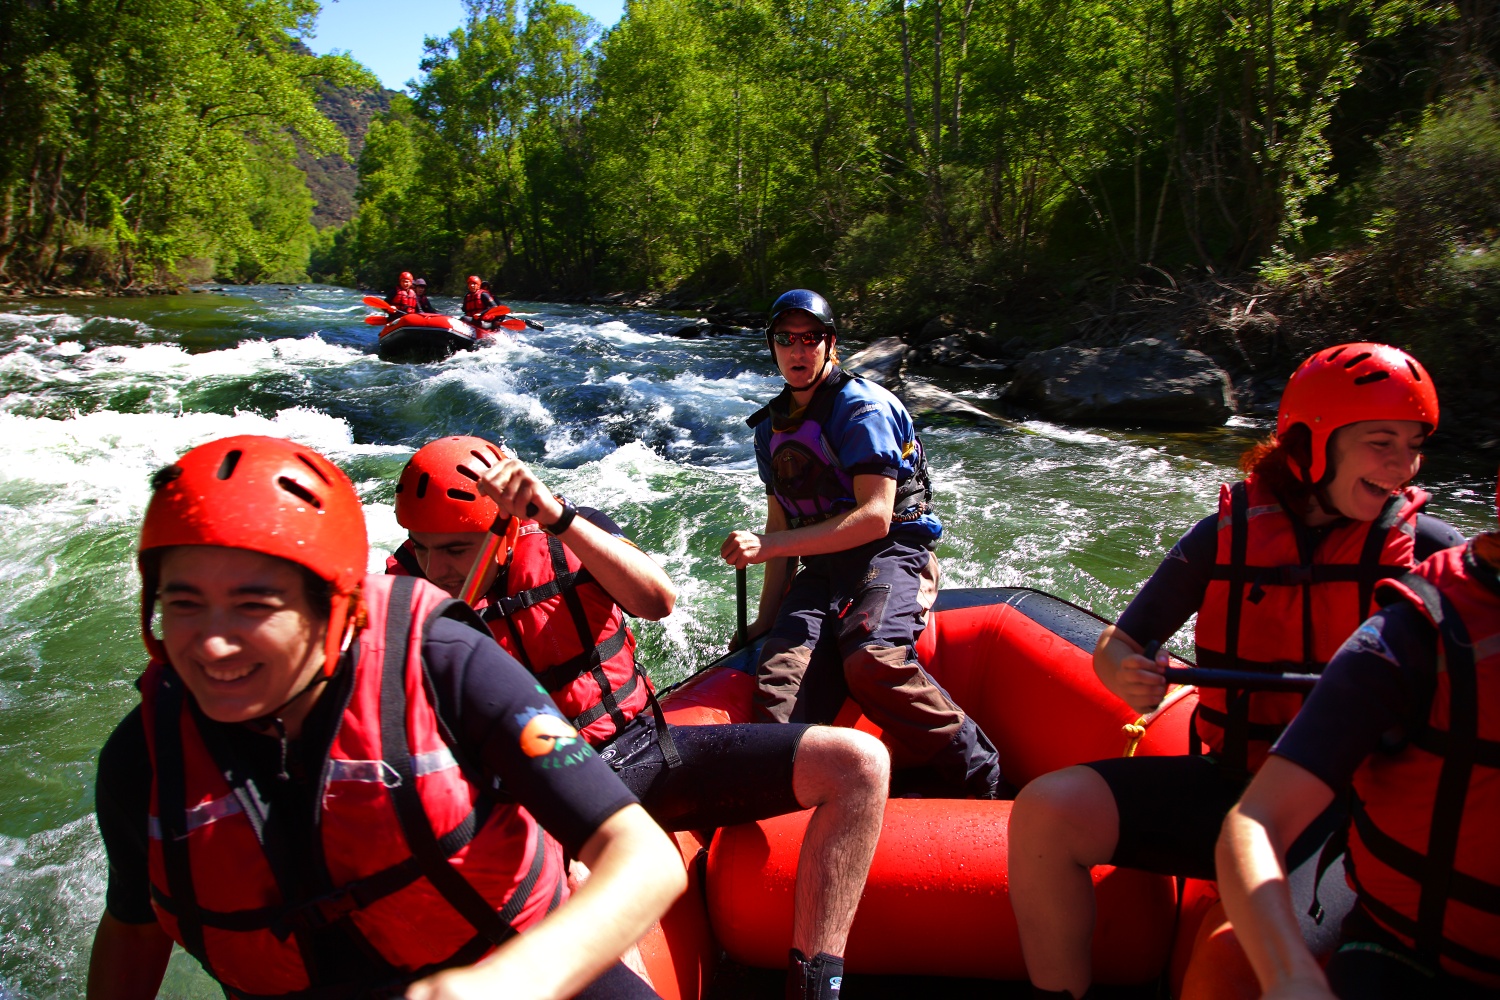 Action shot of people in boat doing white water rafting, Catalonia